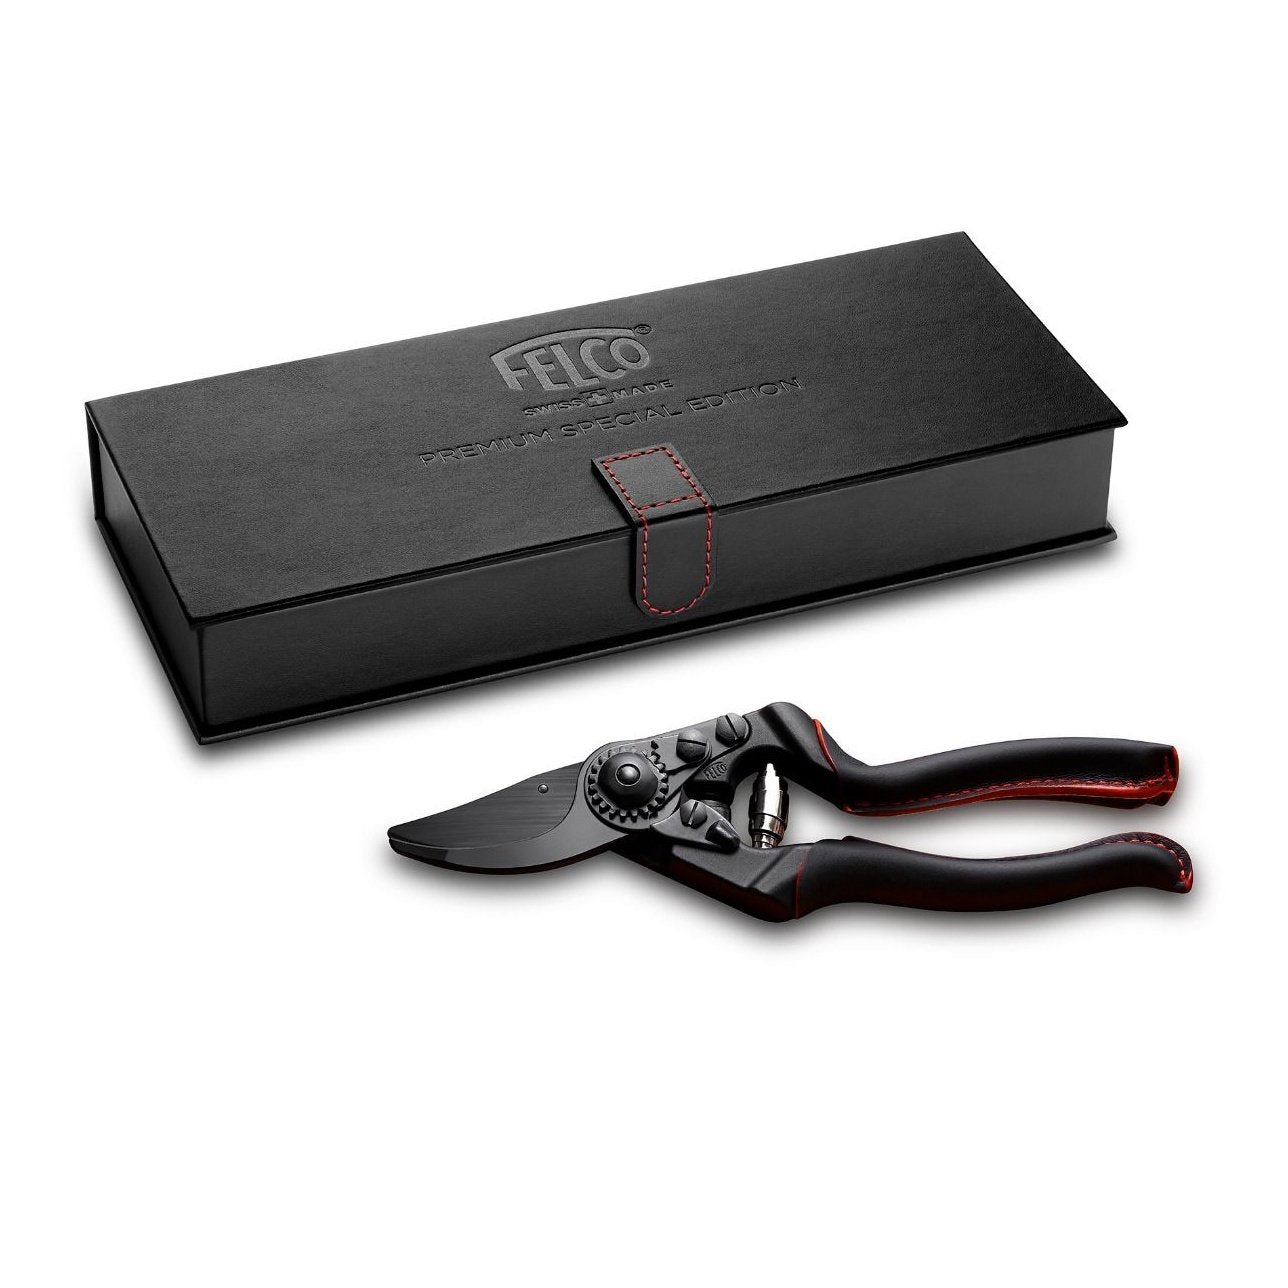 Felco 8 Special Edition Premium Bypass Pruner F-8PSE